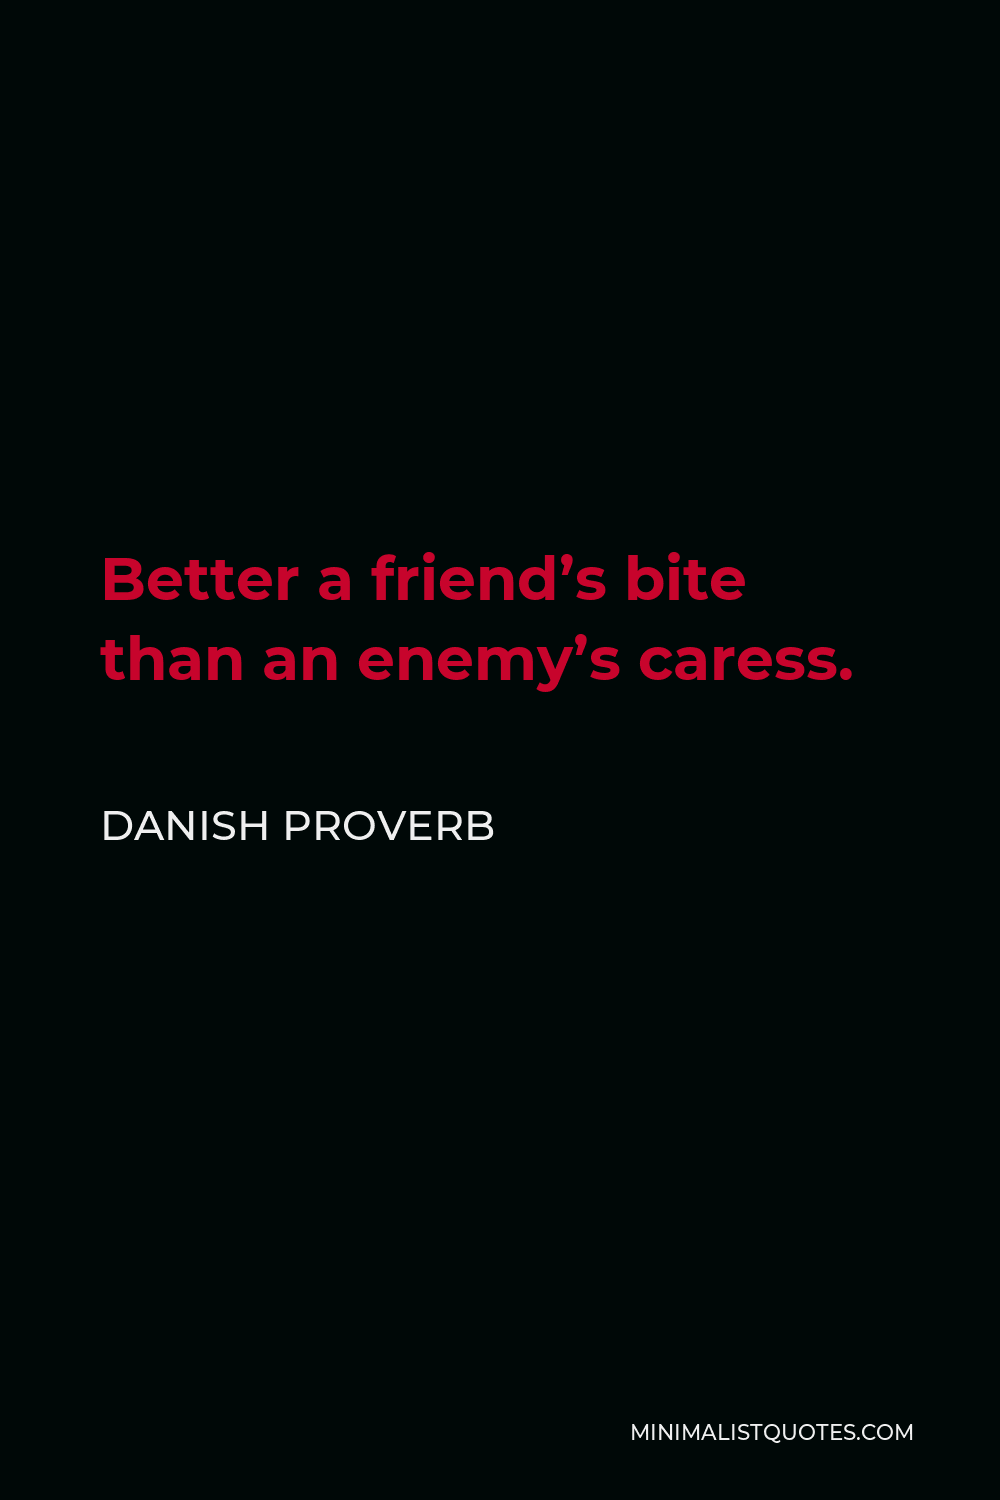 Danish Proverb Quote - Better a friend’s bite than an enemy’s caress.